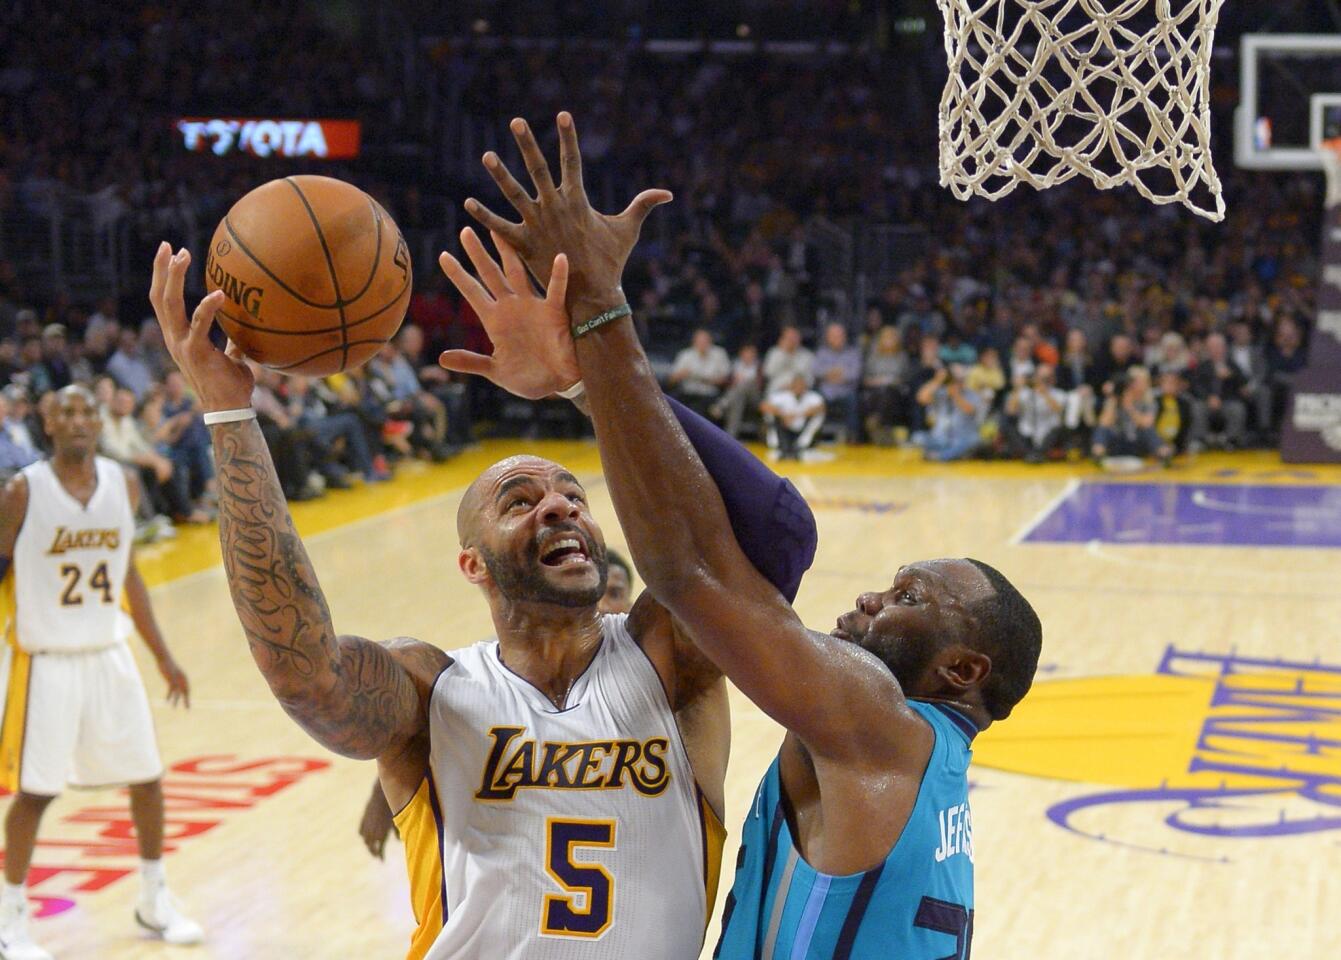 Lakers power forward Carlos Boozer goes to the basket against Charlotte Hornets center Al Jefferson during a game at Staples Center on Nov. 9. The Lakers won, 107-92.